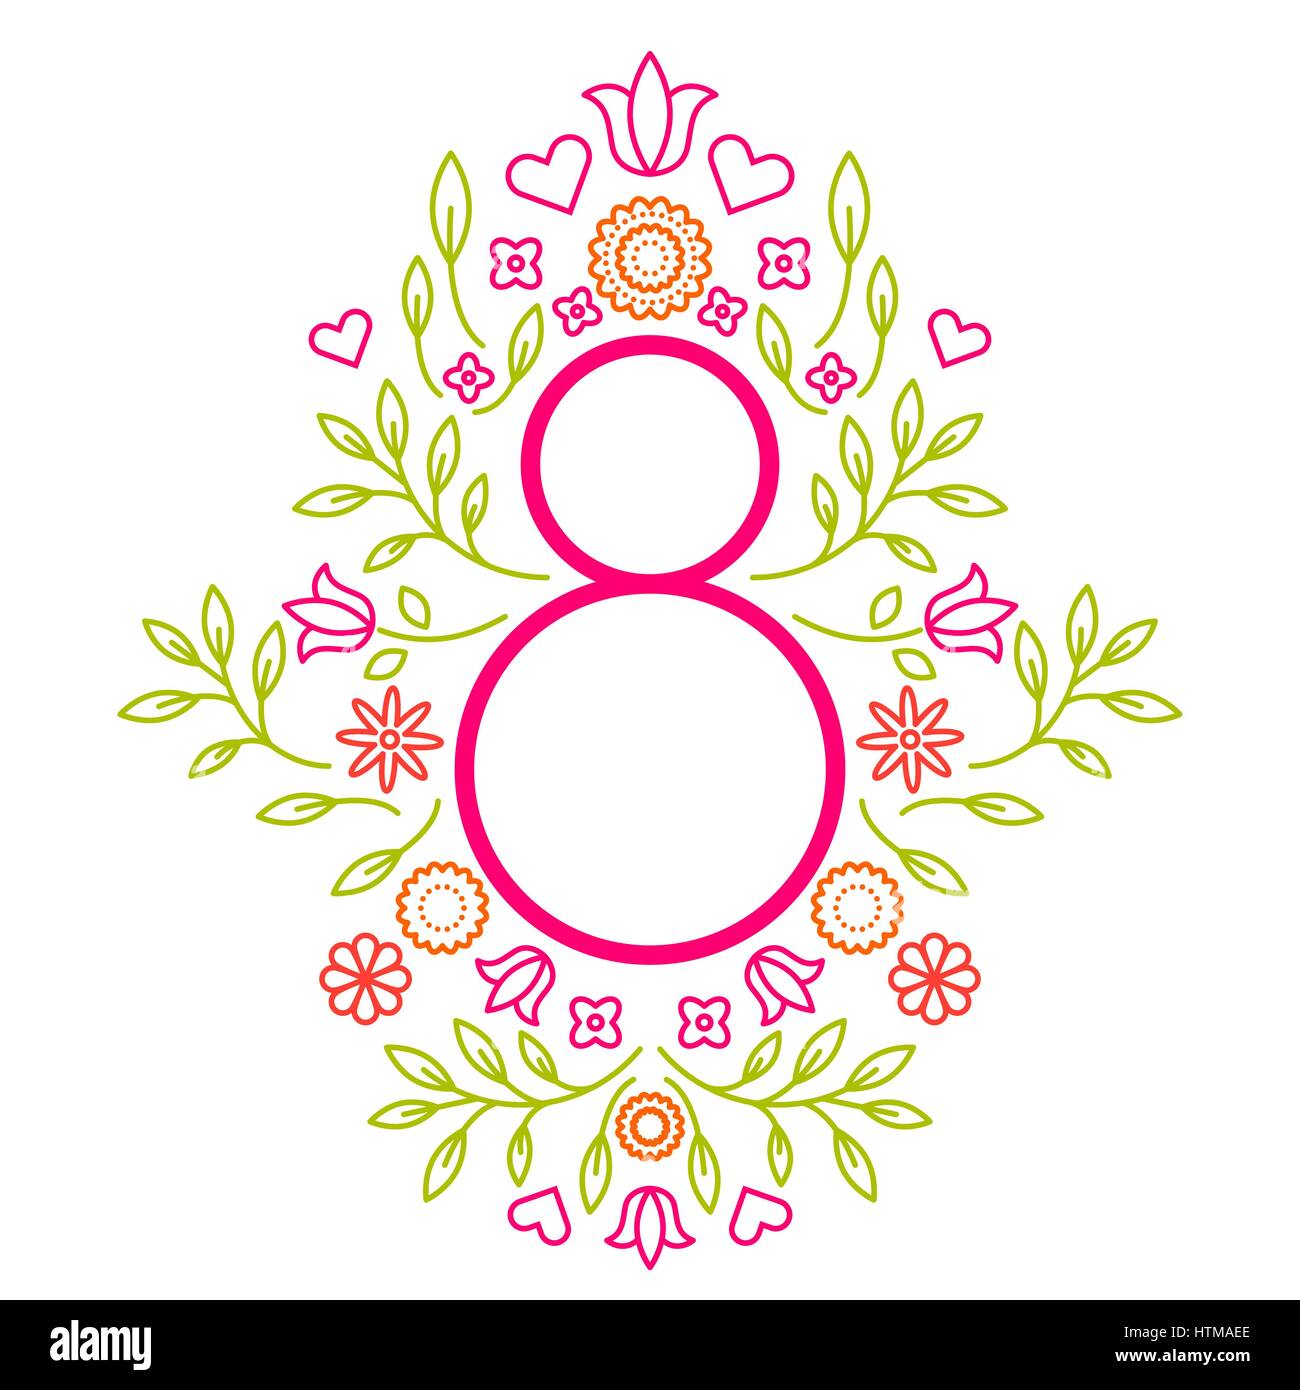 Greeting card template for March 8 womens day. Stock Vector